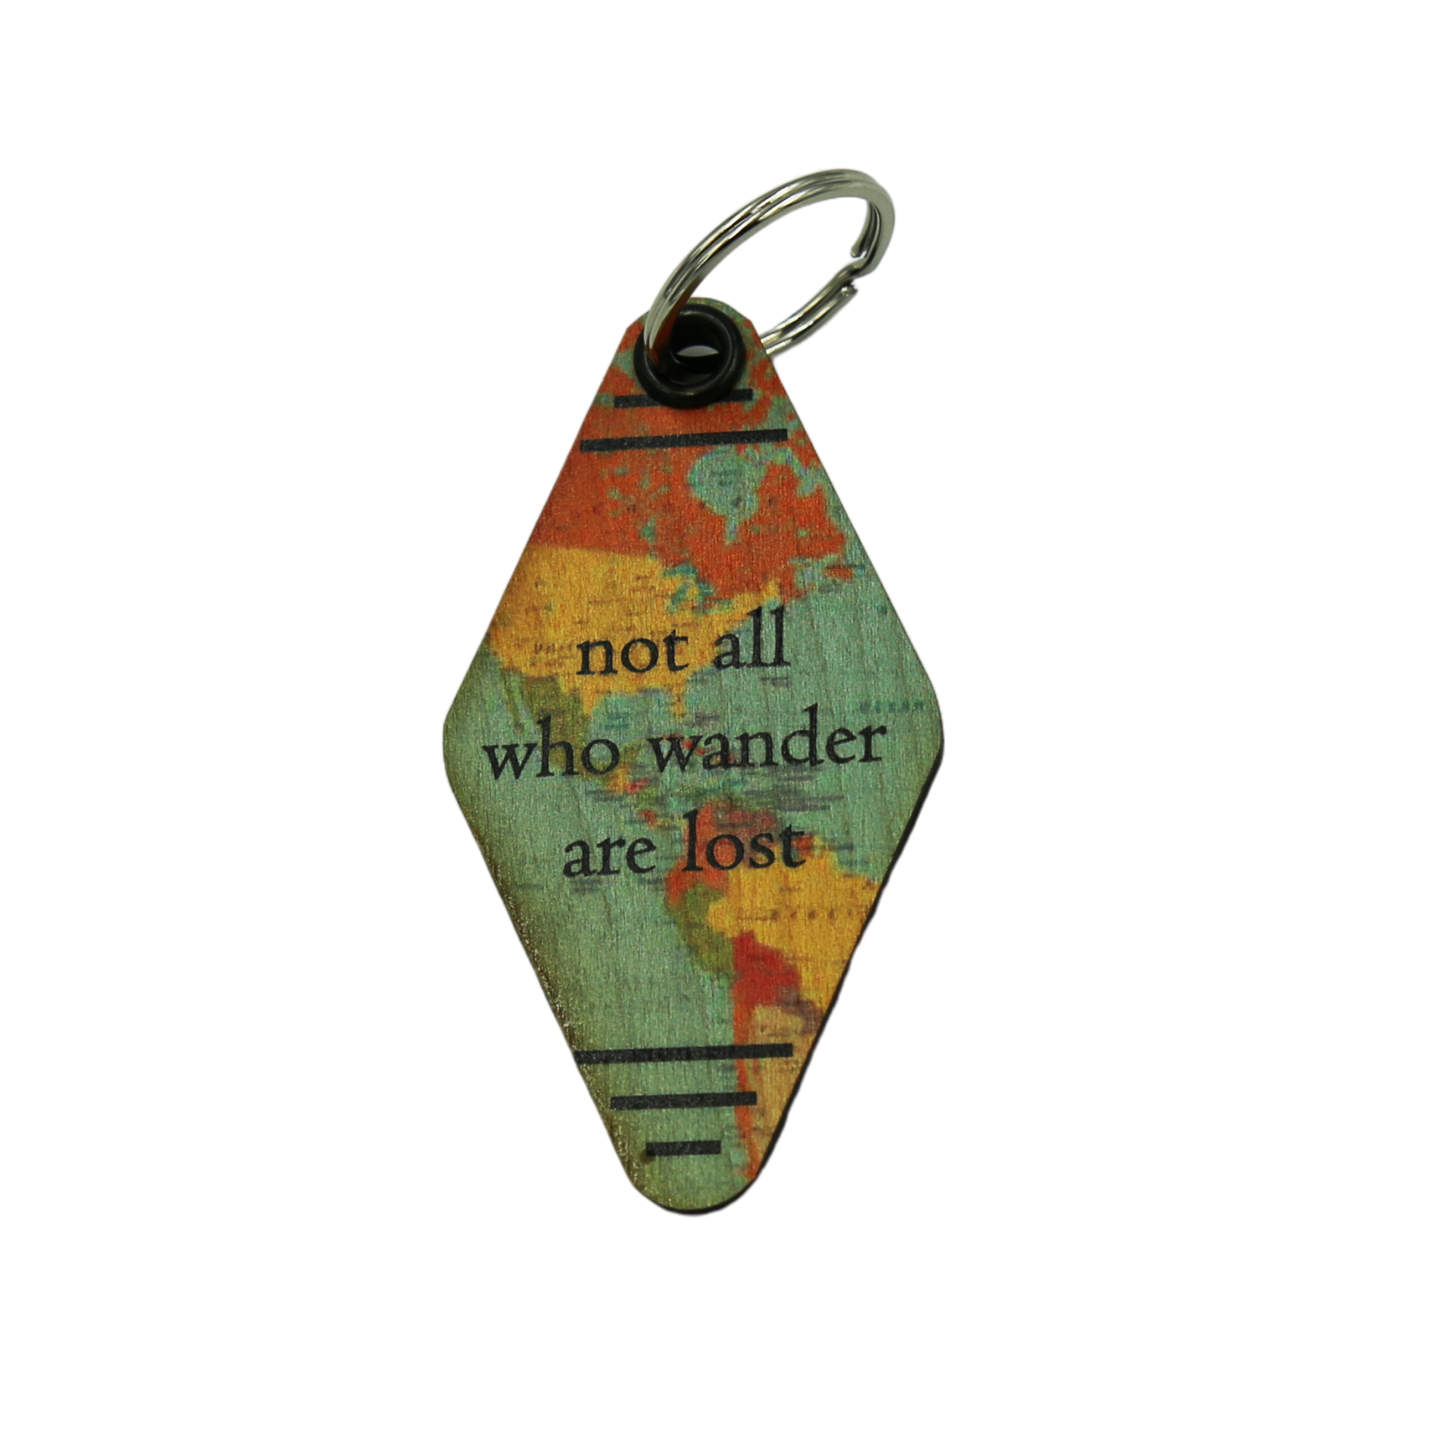 Driftless Studios Travel Keychain - Not all who wander are lost.